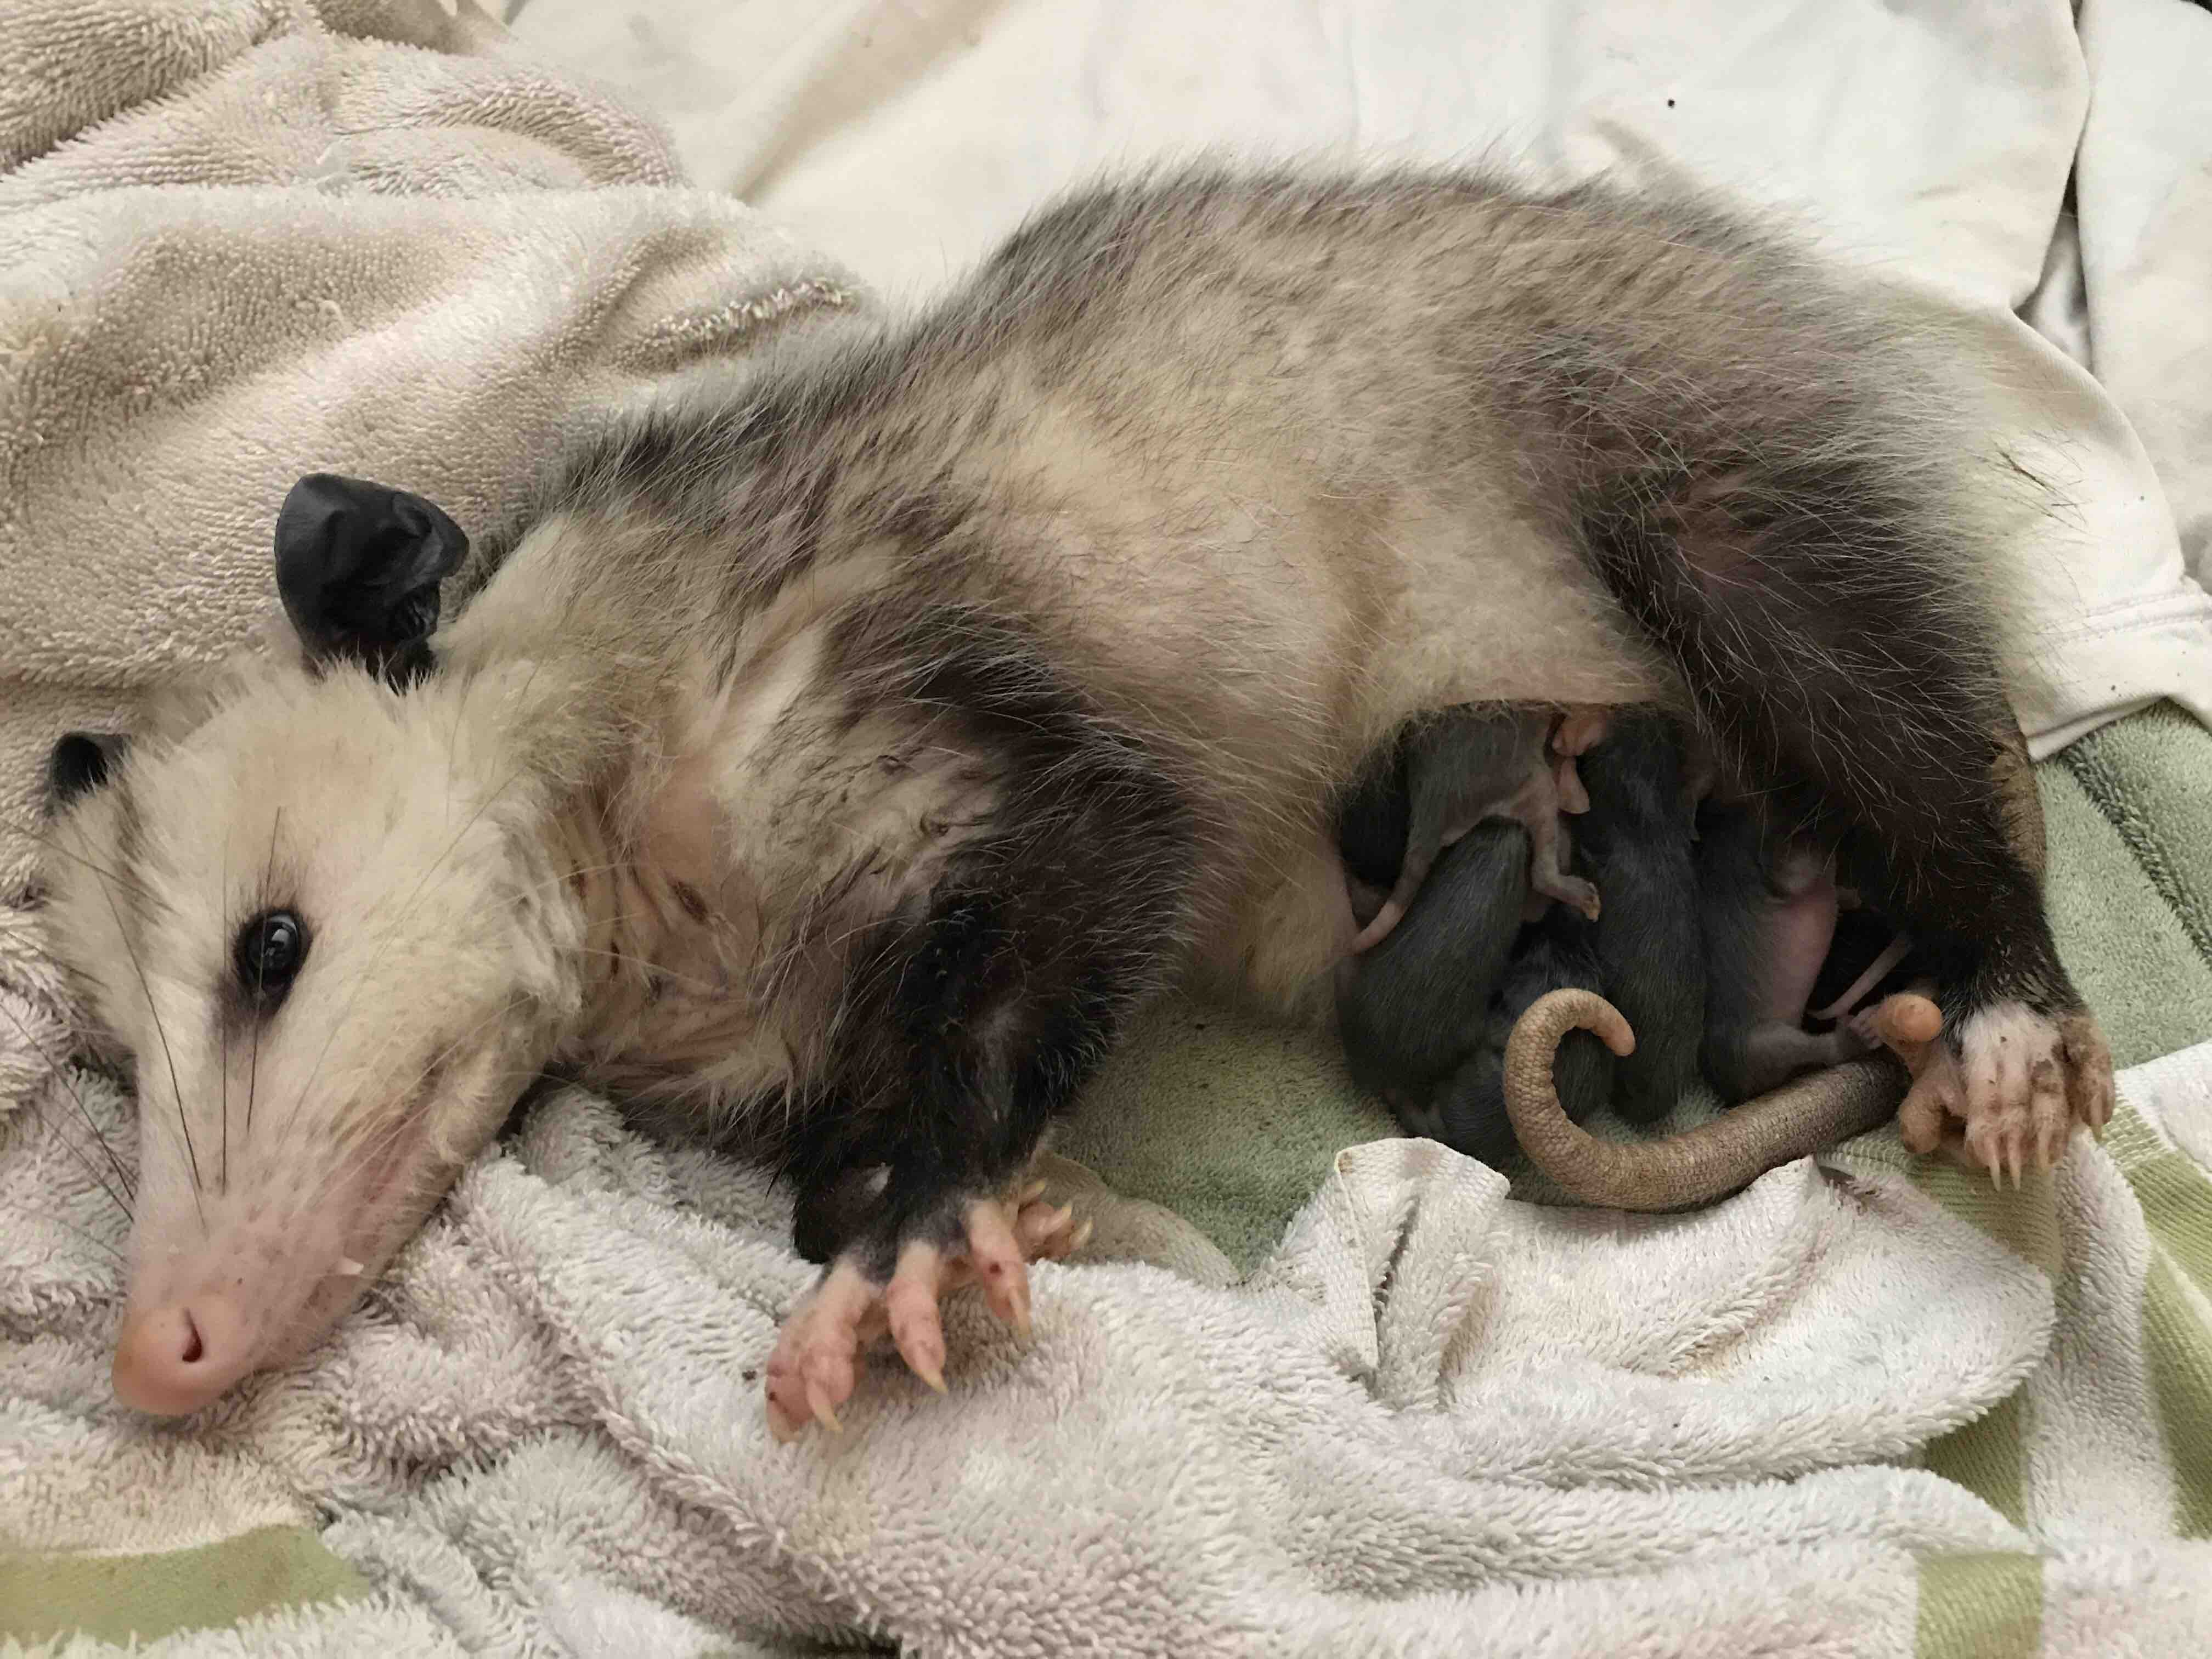 Fundraiser by Lori King : Save Momma Opossum and babies4032 x 3024